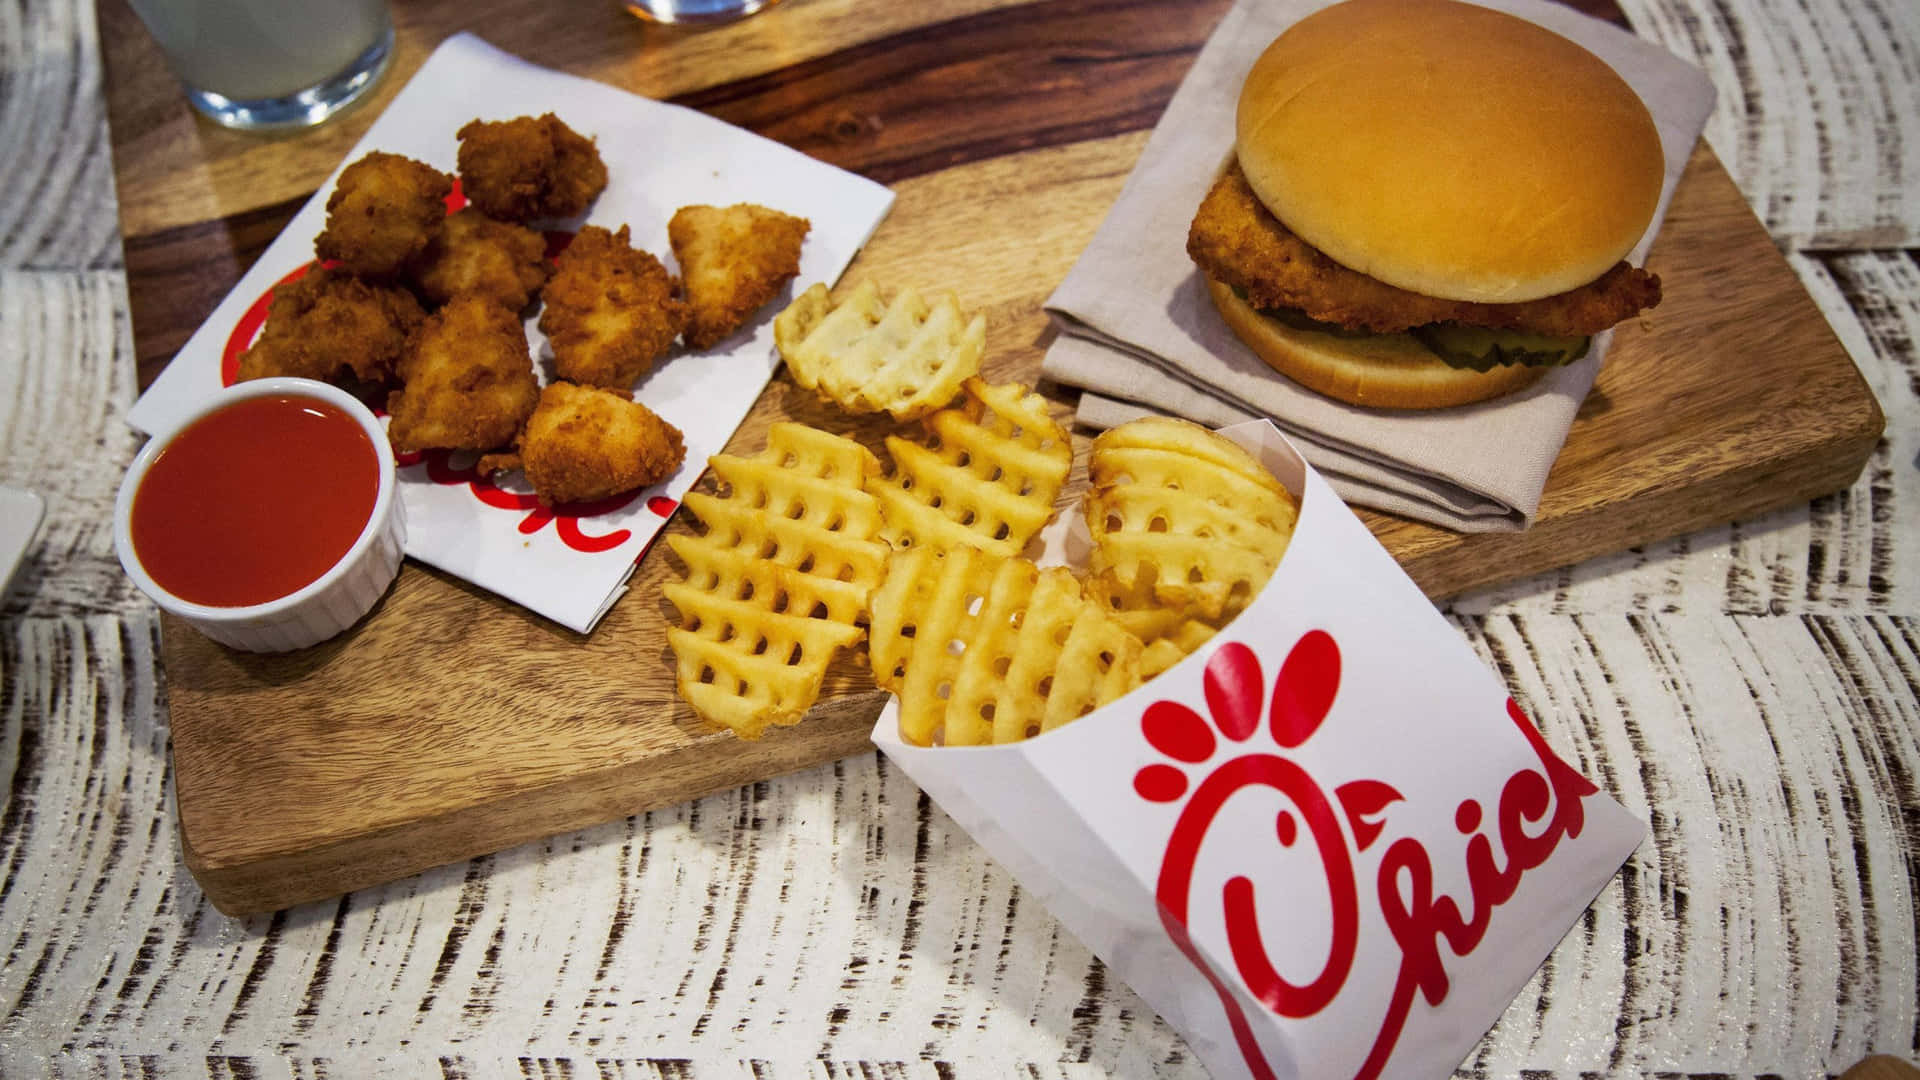 Chick-fil-a Burger And Fries On A Wooden Cutting Board